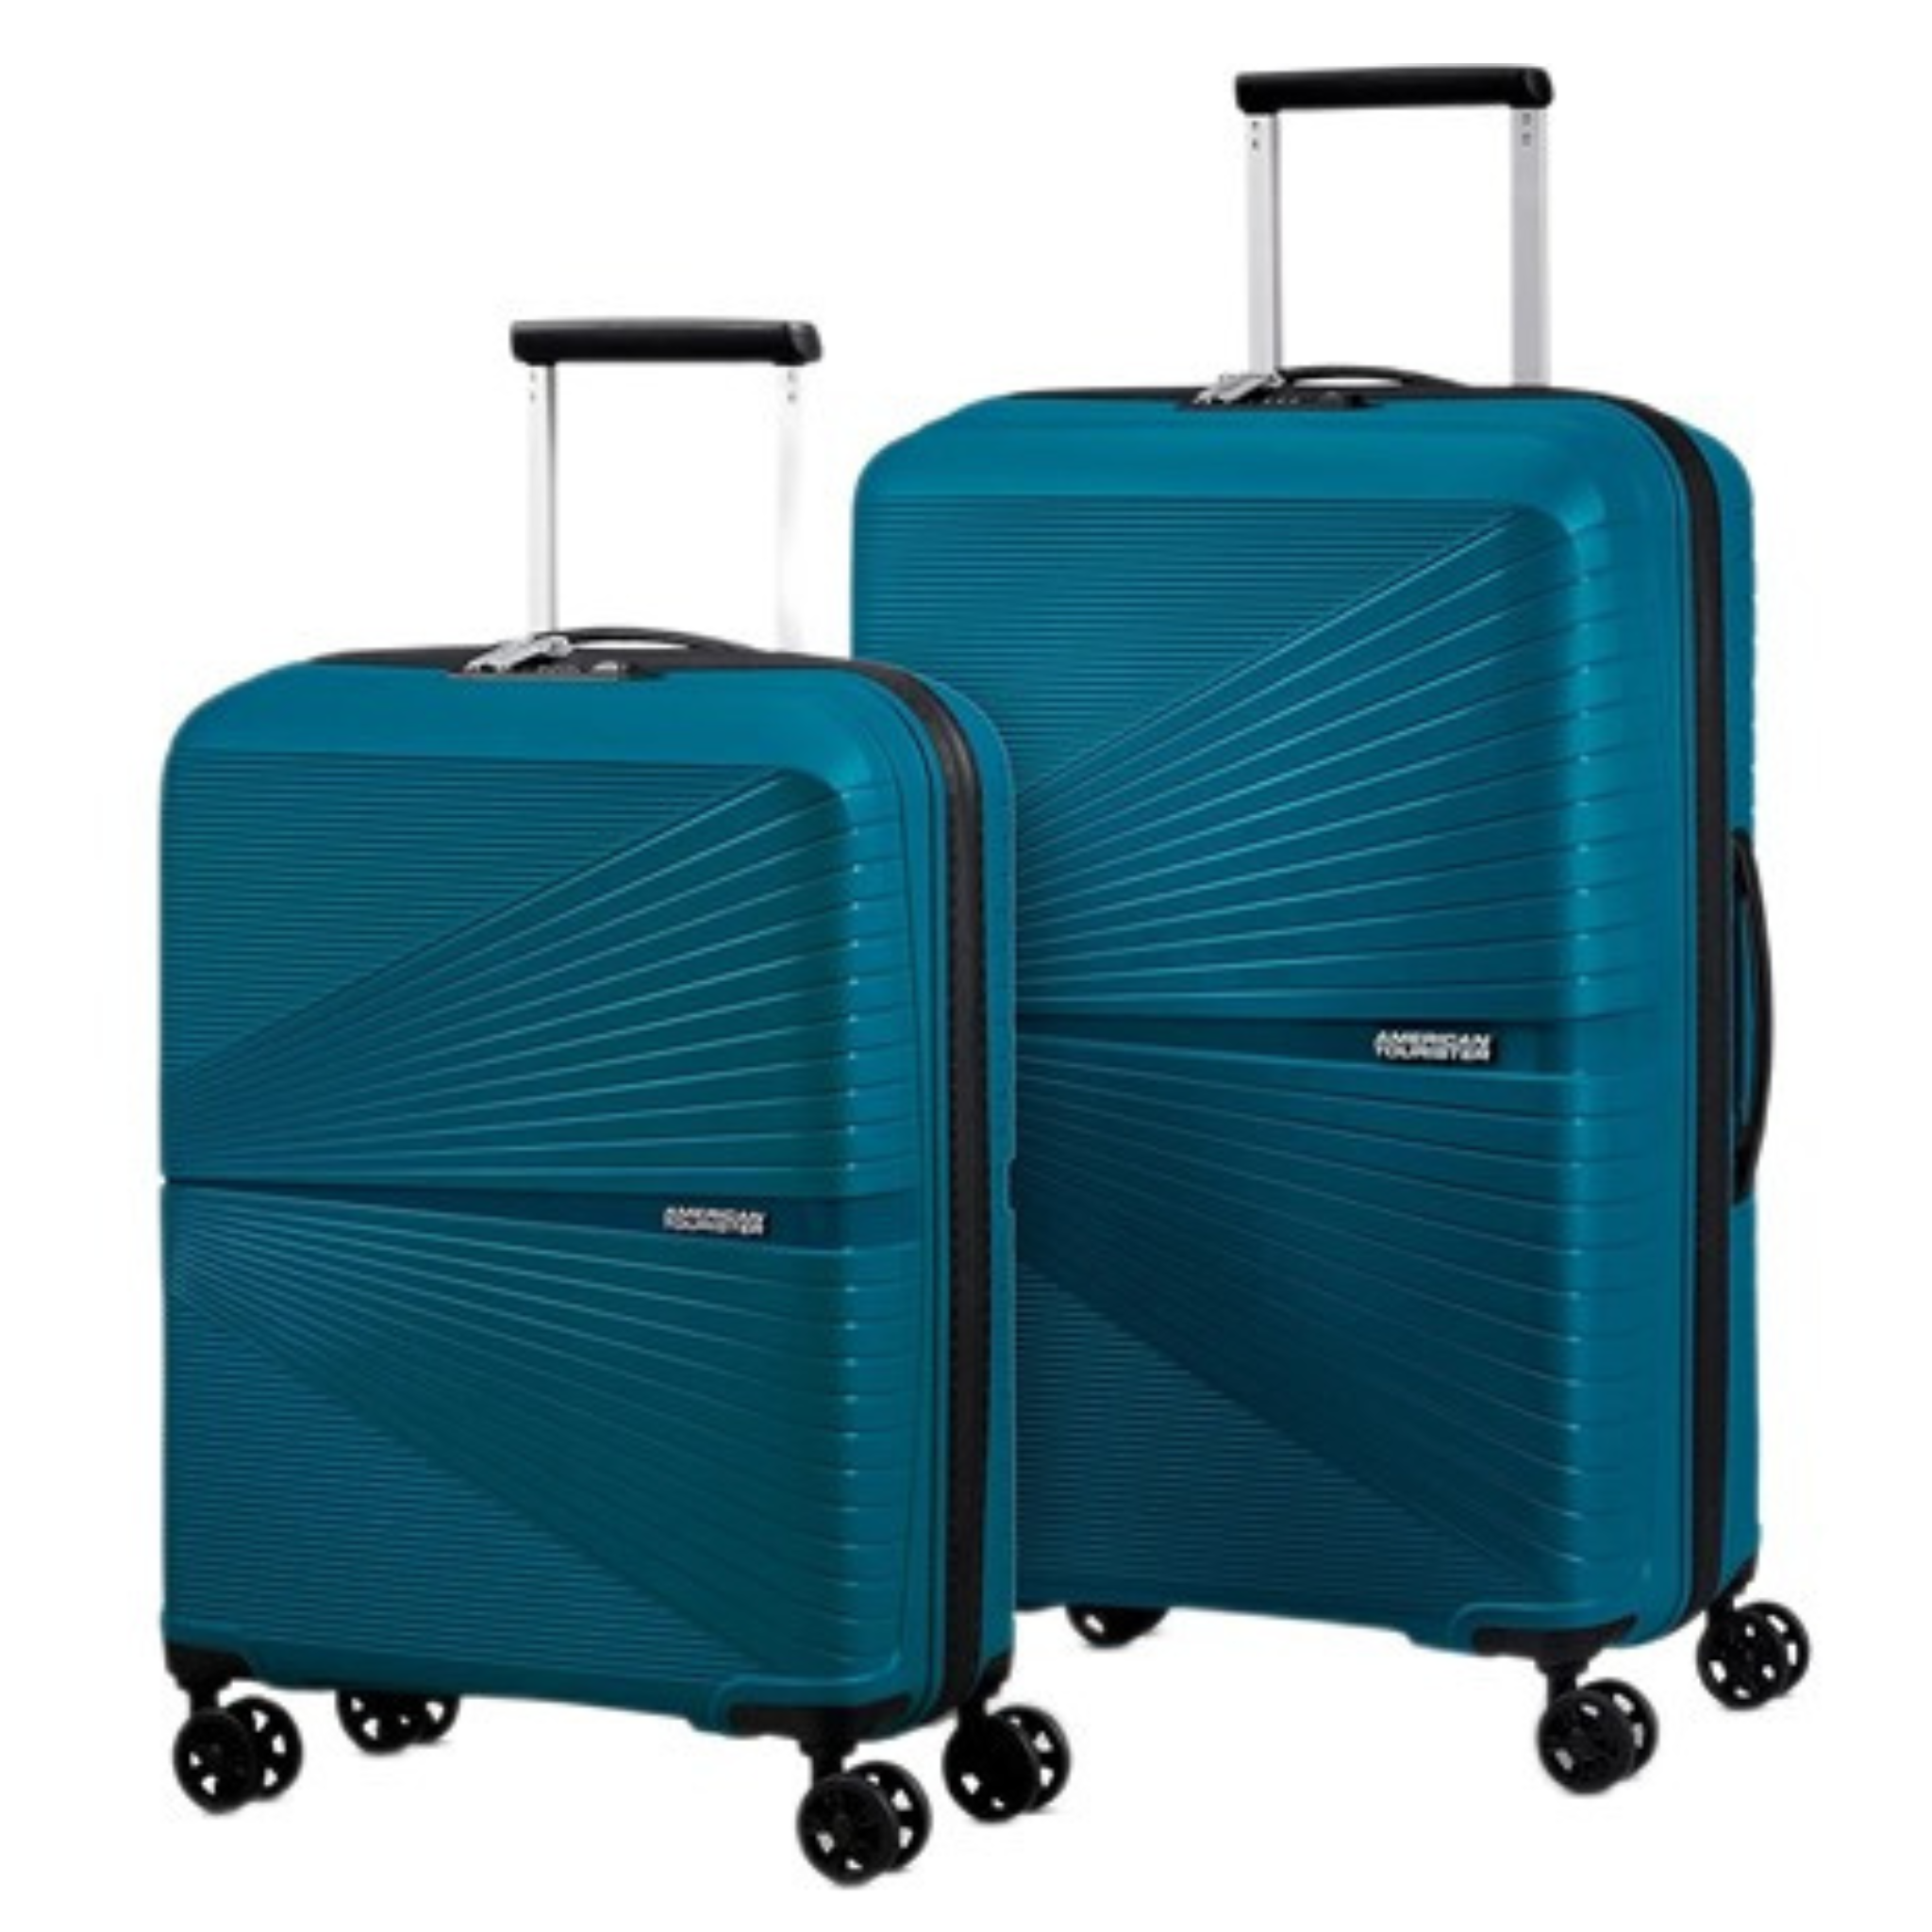 2-Piece American Tourister Hardside Expandable Luggage with Spinners Set